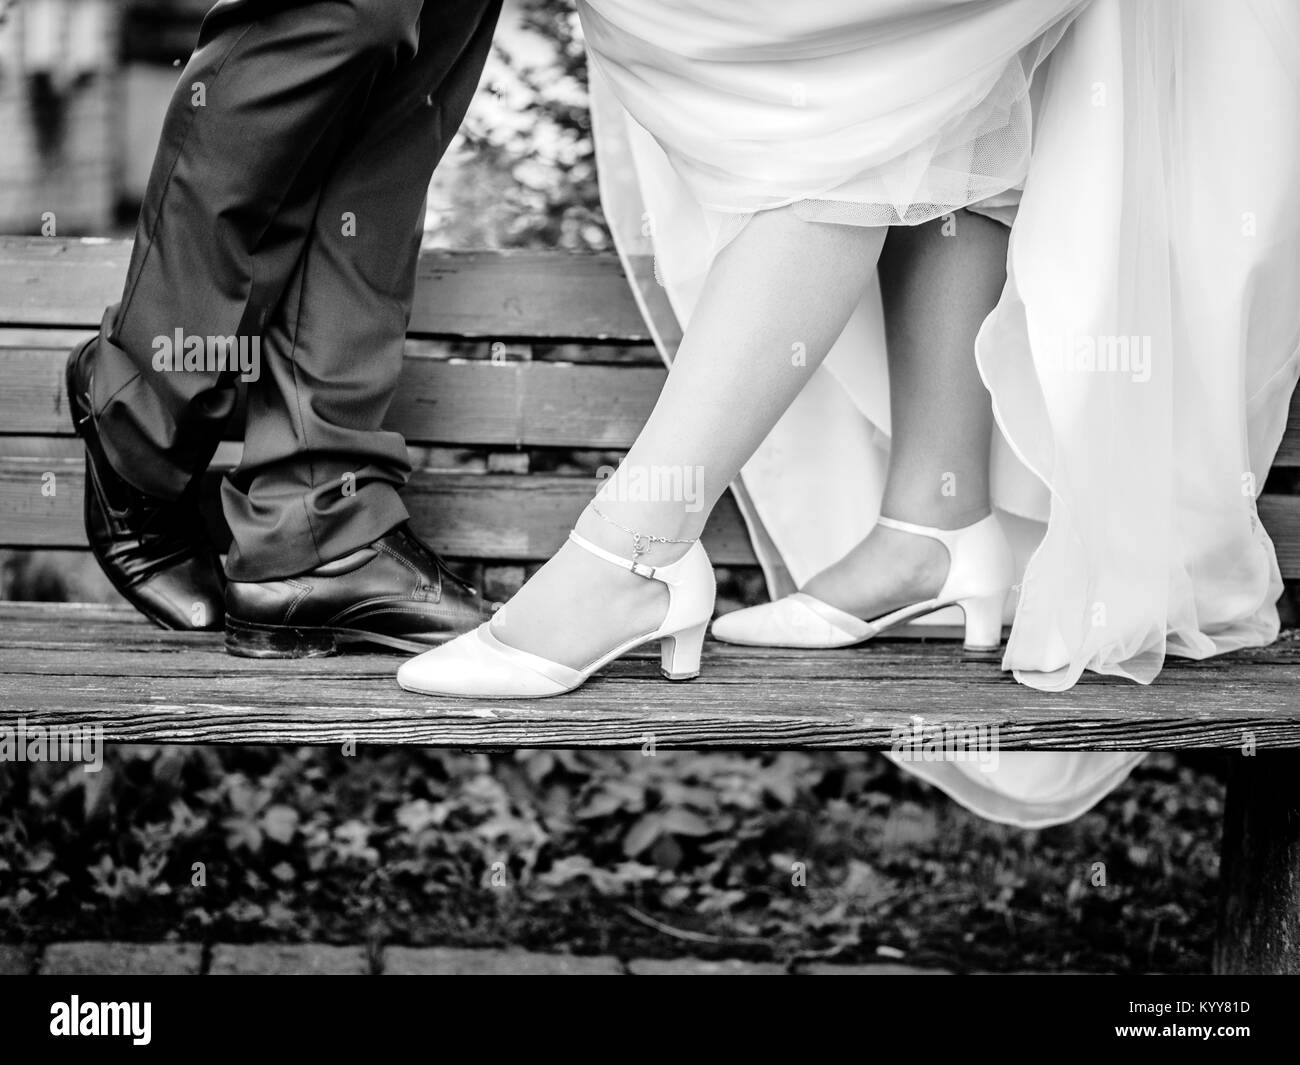 the bride and groom on the bench Stock Photo